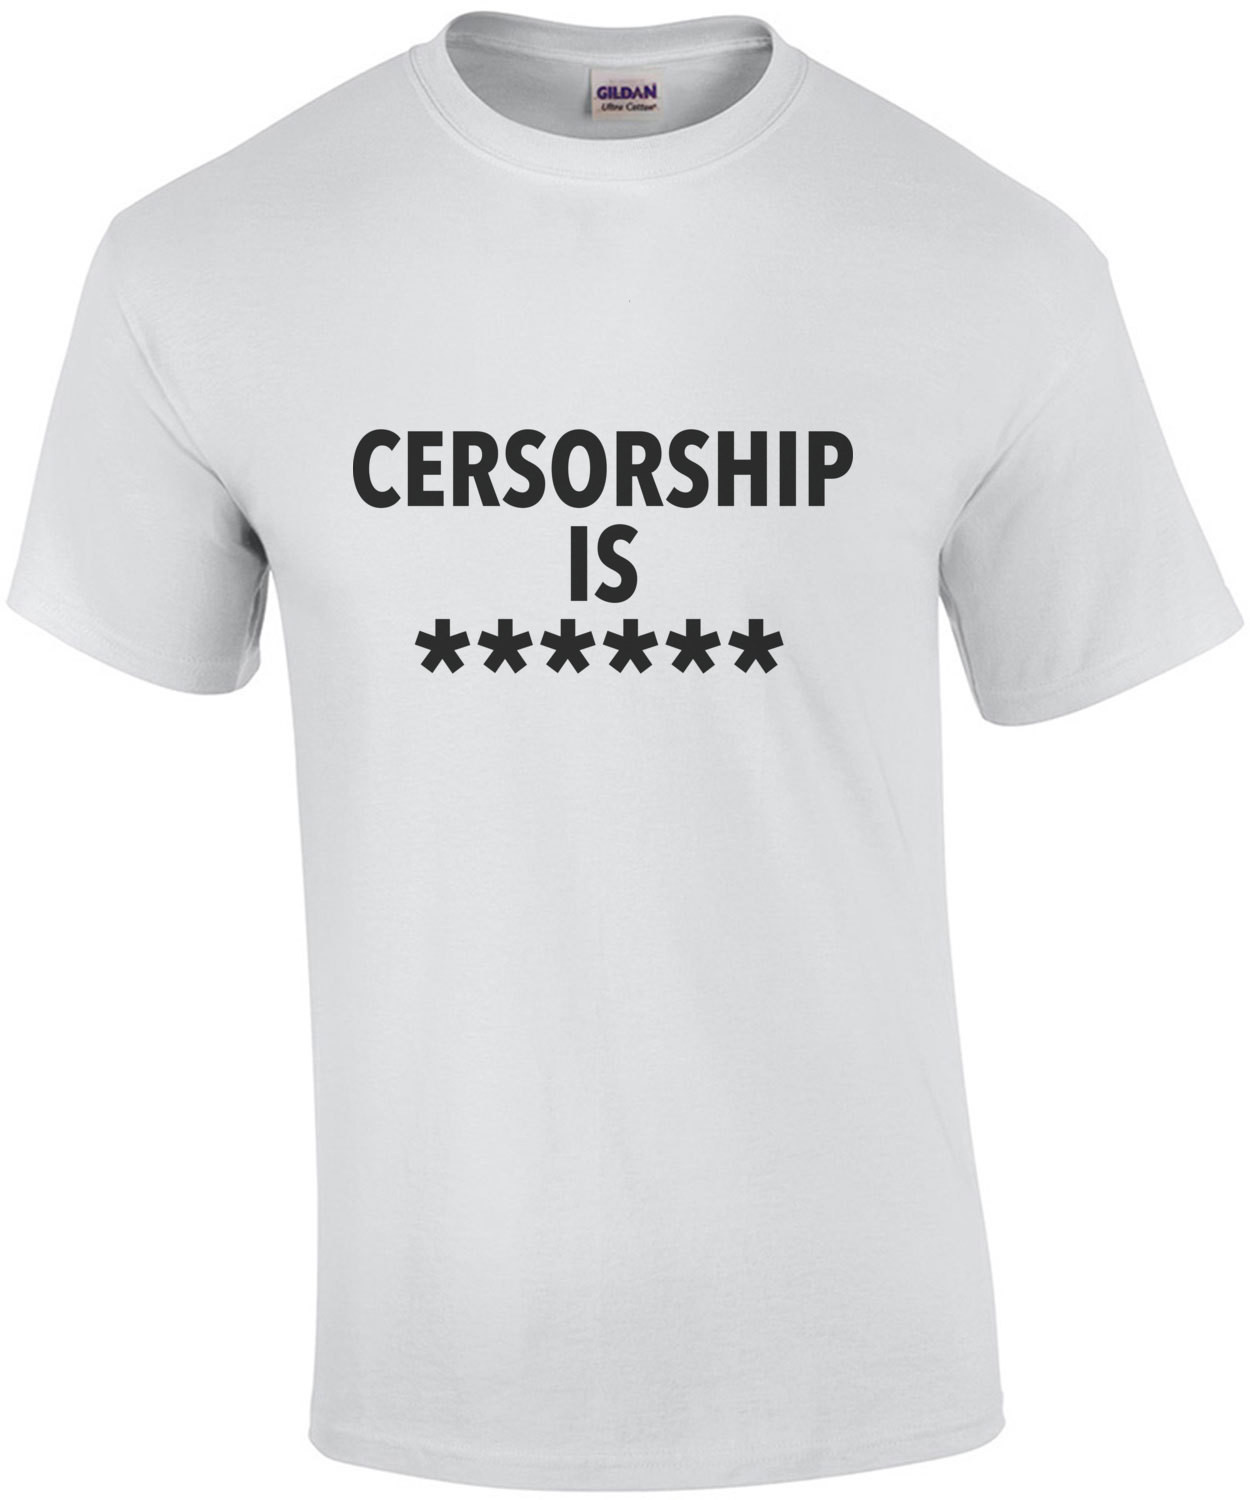 Censorship is ****** - funny t-shirt